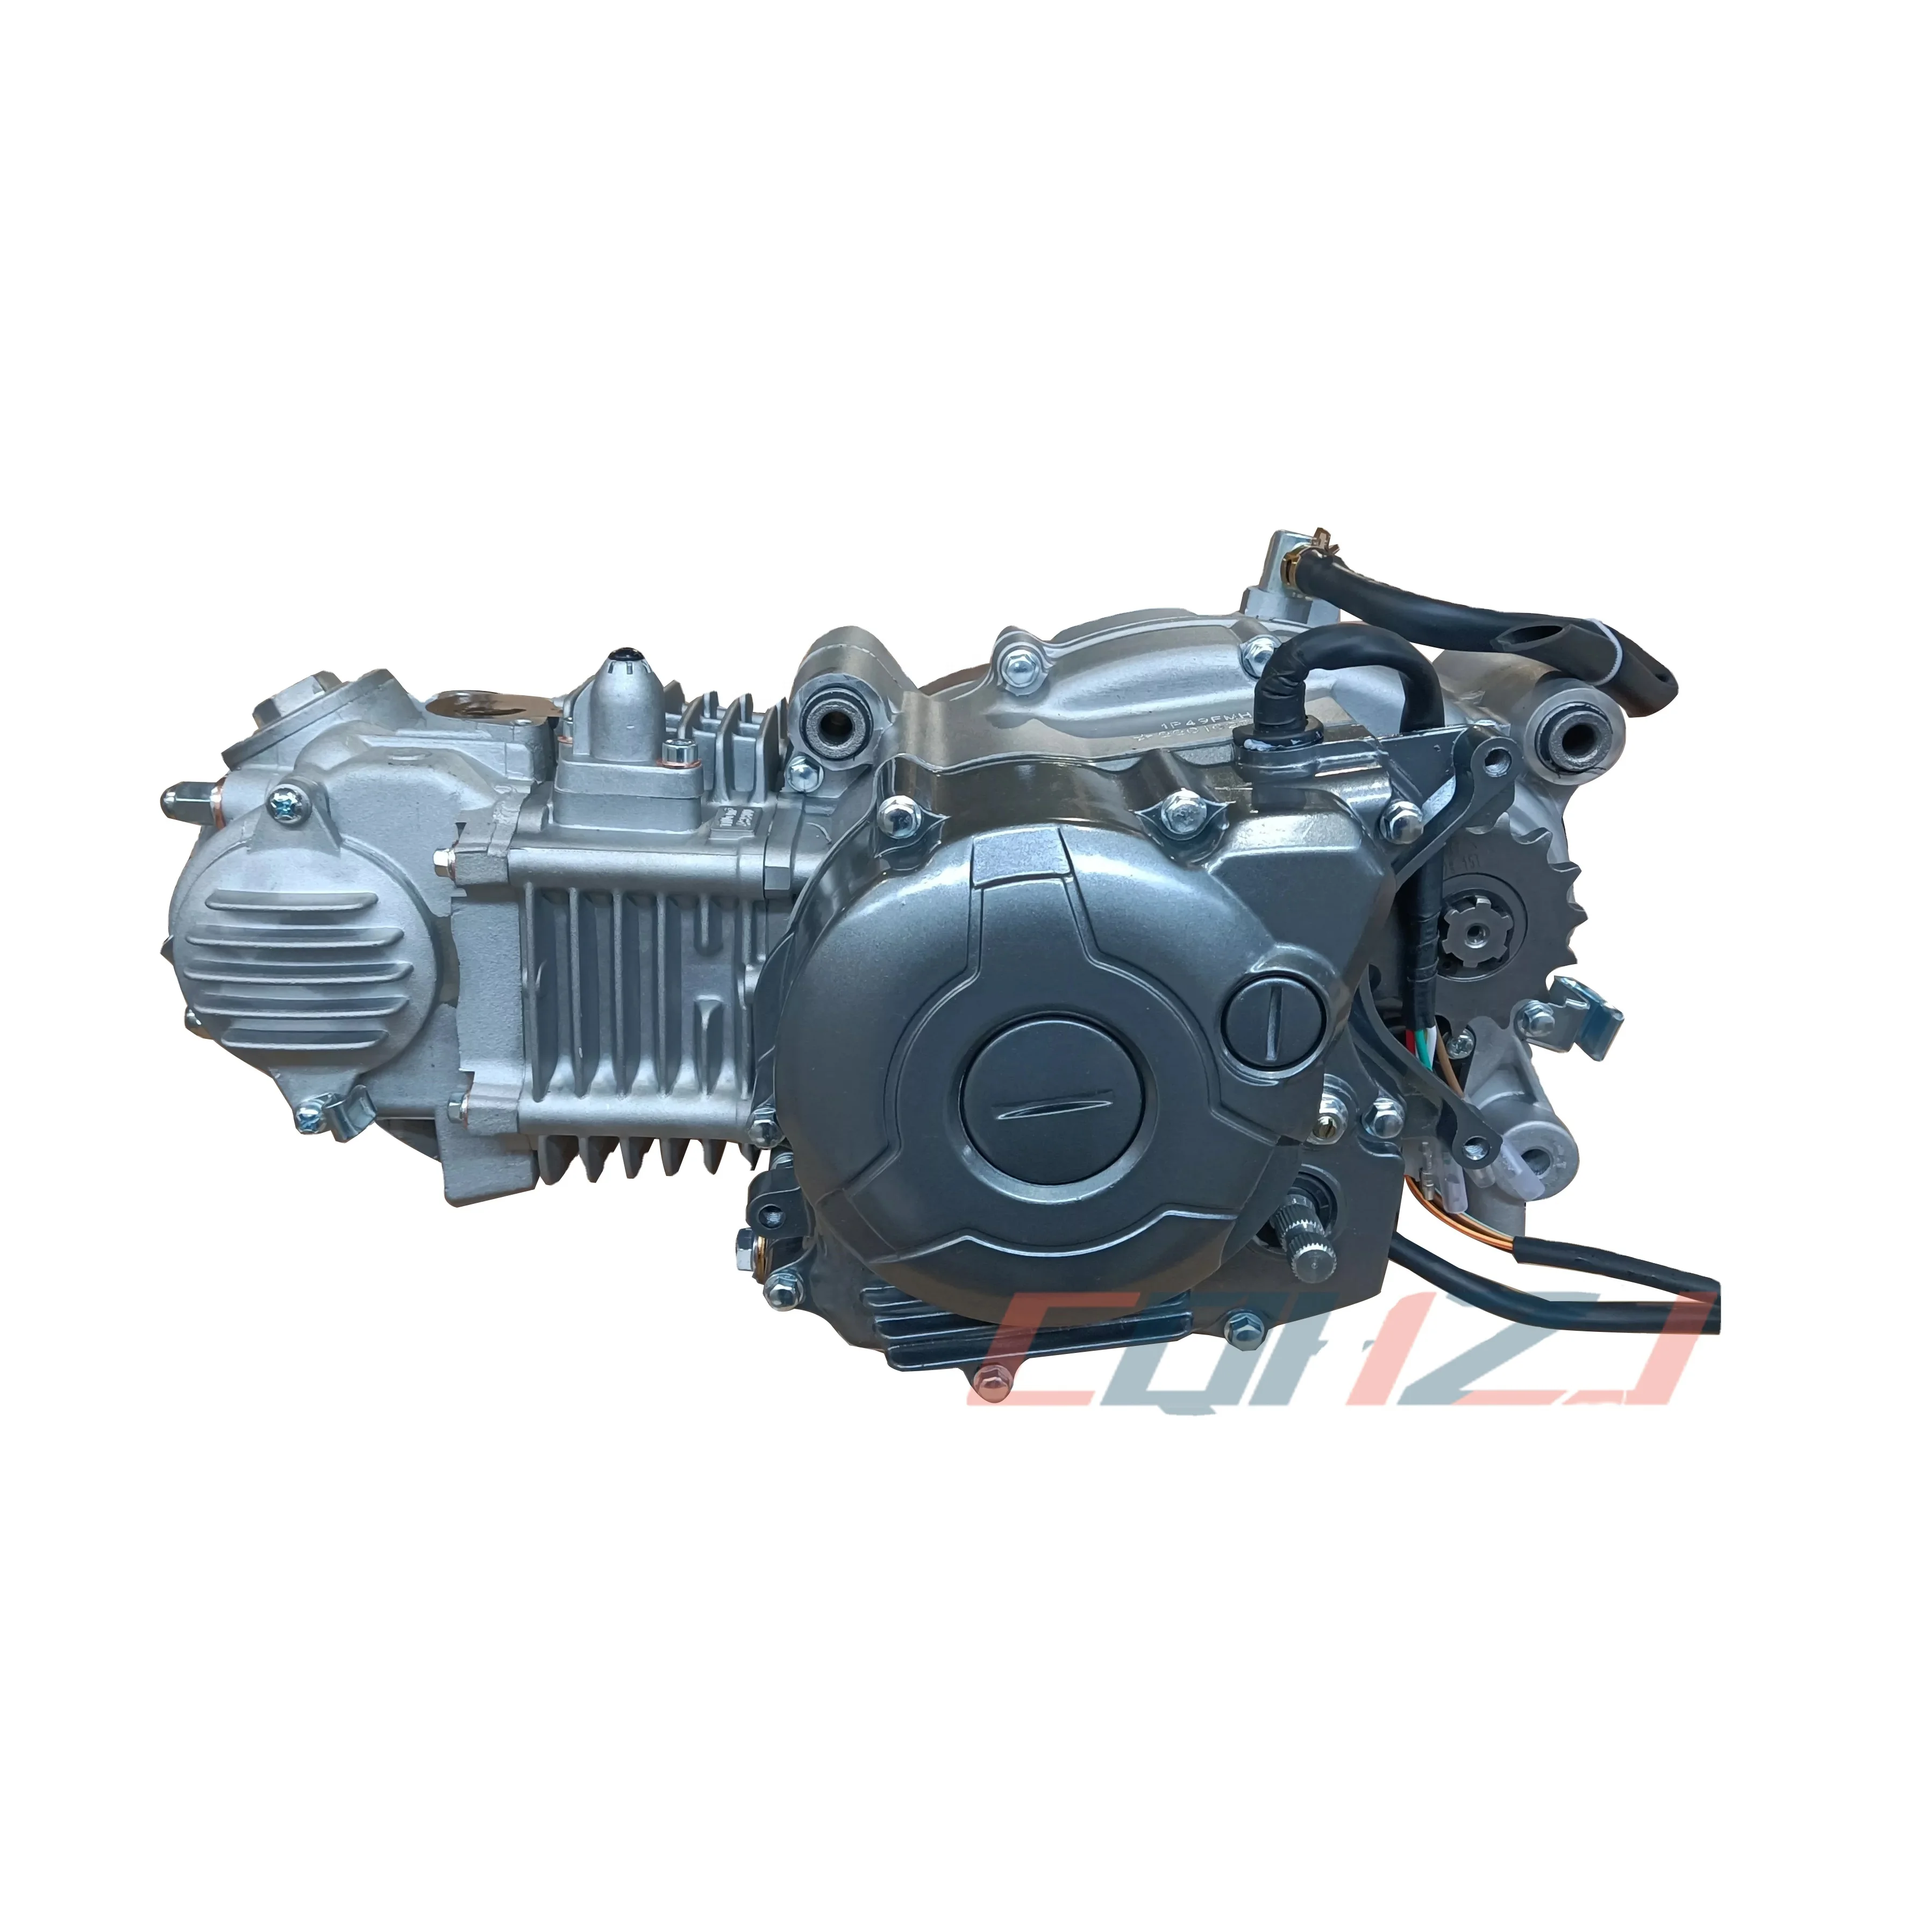 CQHZJ Factory Direct Sale Motorcycle Engines Assembly JY110 YB110 YBR125 YBR150 Air-Cooled Engine built in balance shaft 250cc motorcycle engines engine assembly